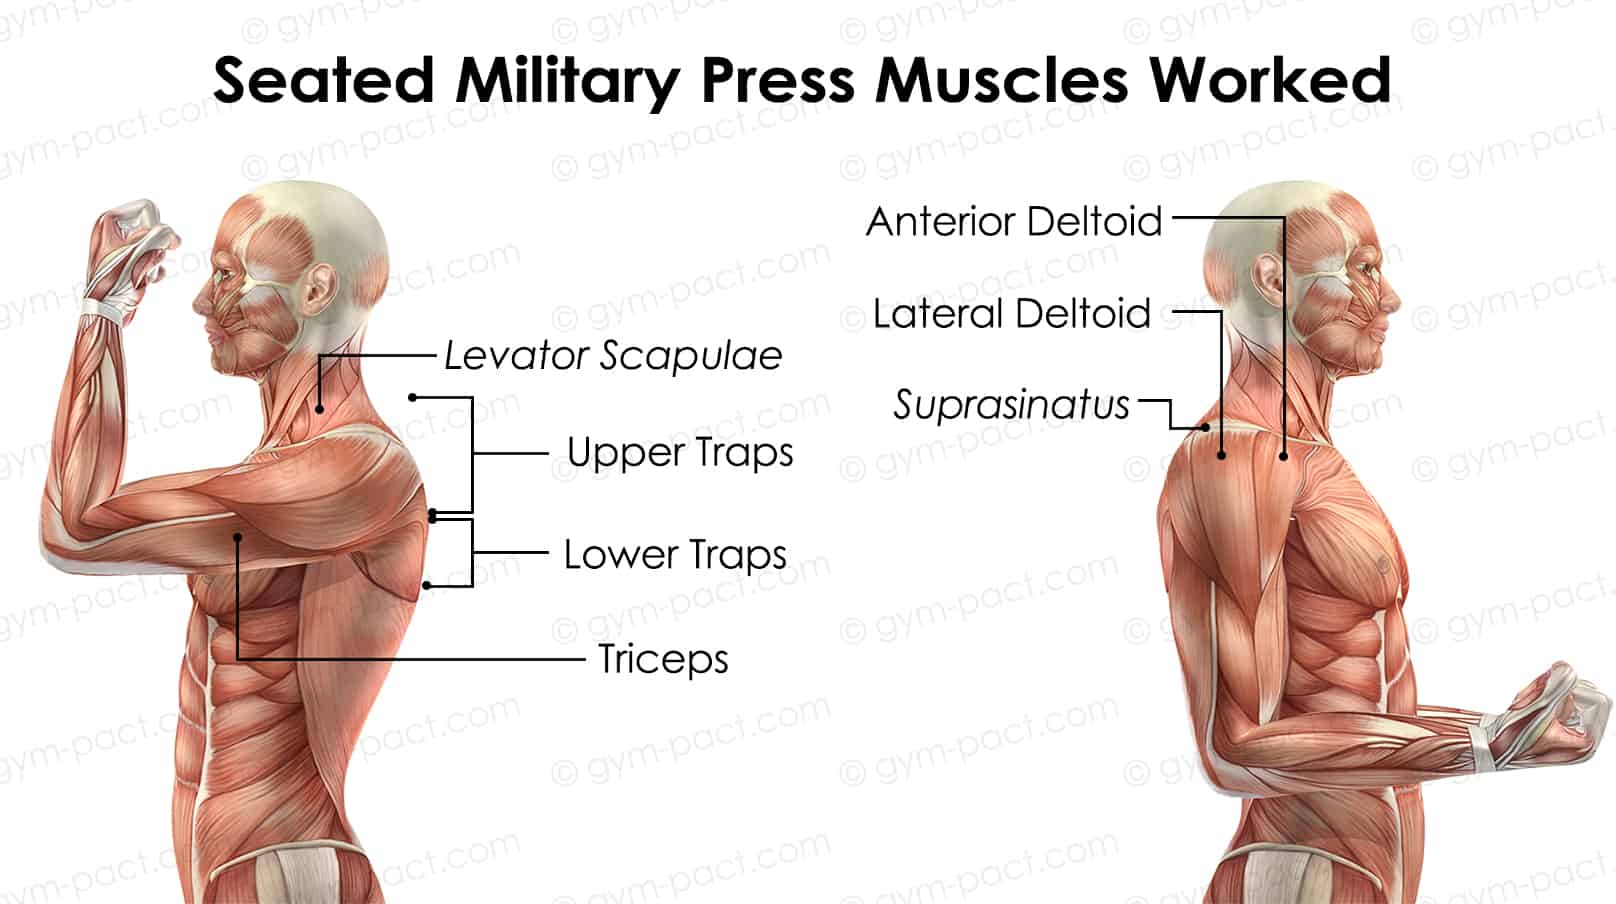 Seated Military Press Muscles Worked